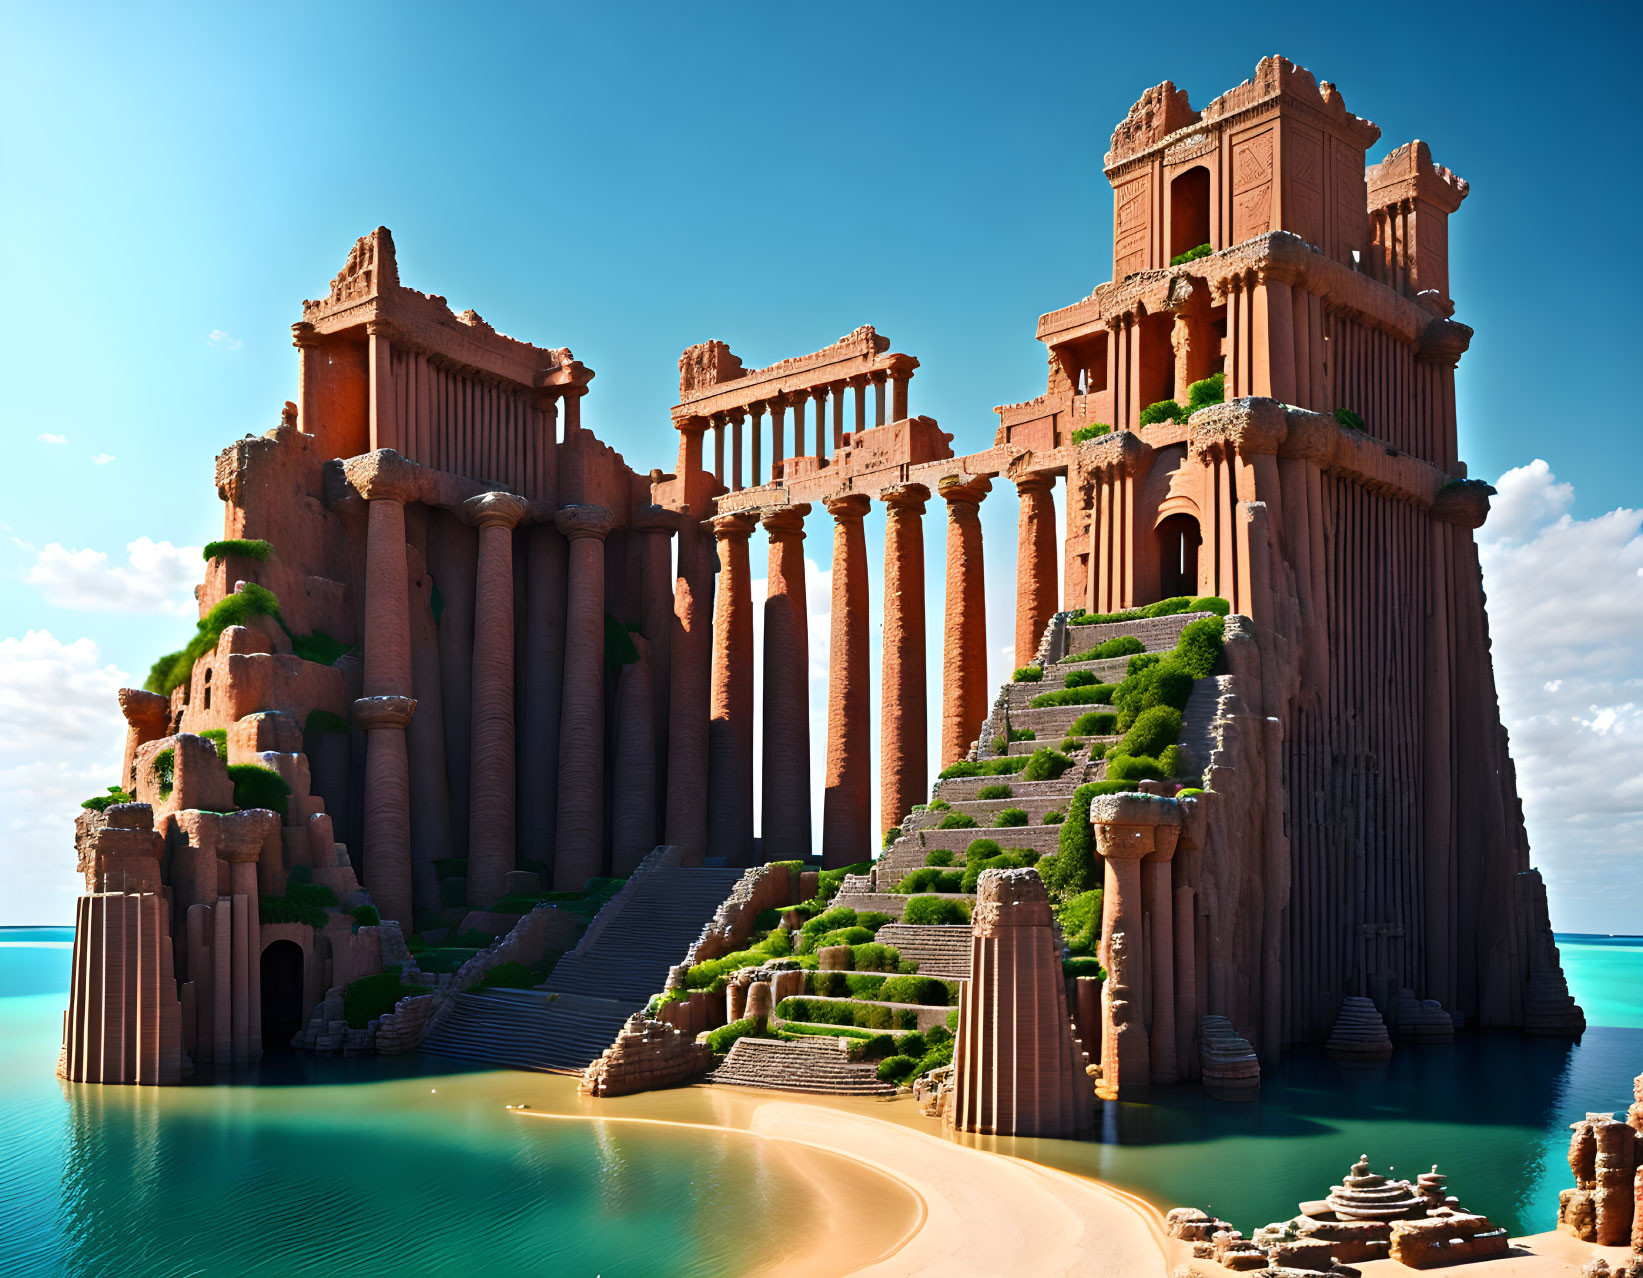 Sandy temple with towering columns on rocky cliff by turquoise sea